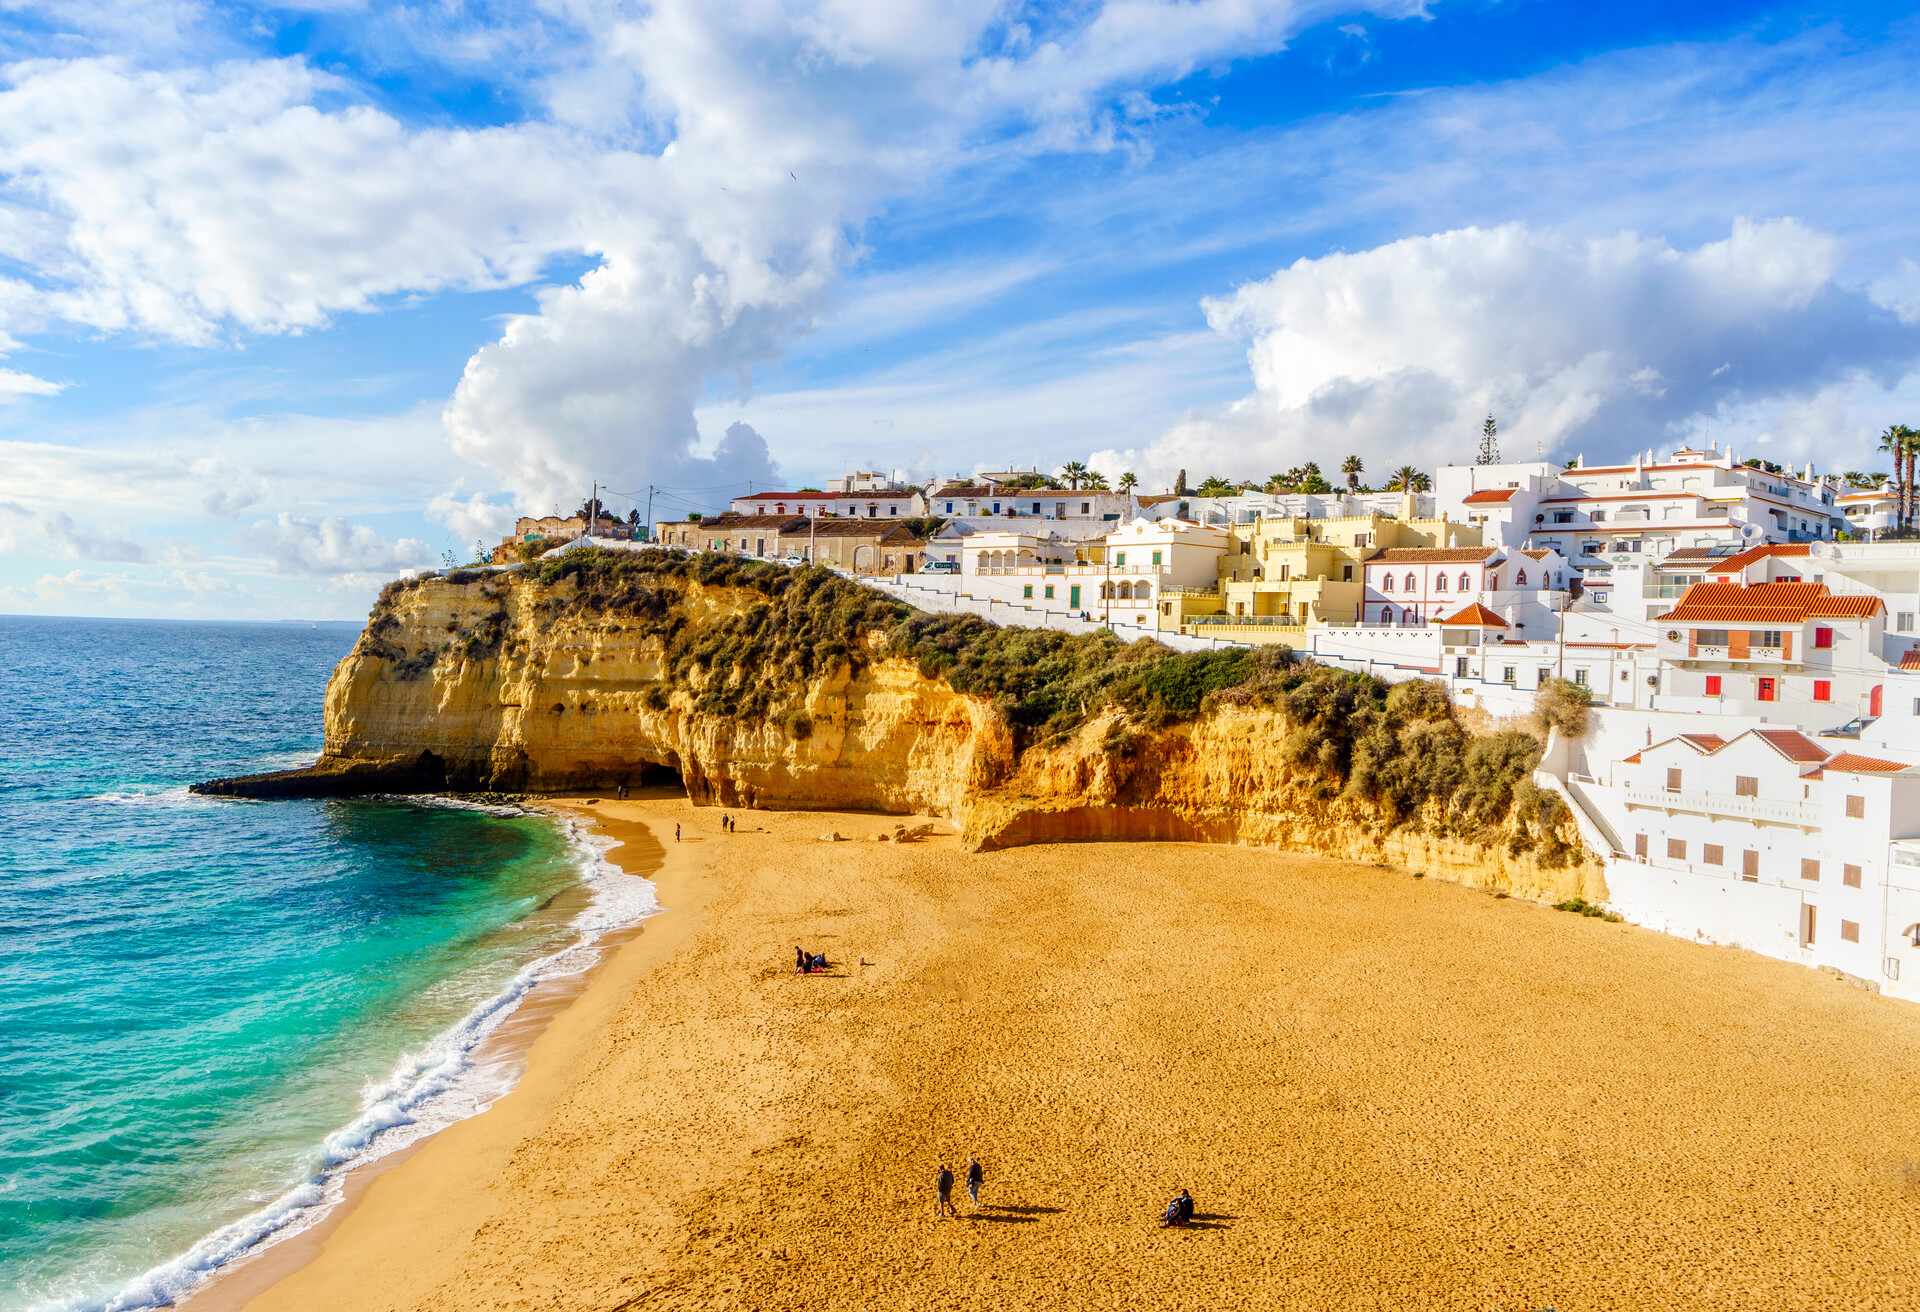 Wide sandy beach between cliffs and in front of charming white architecture in Carvoeiro, Algarve, Portugal